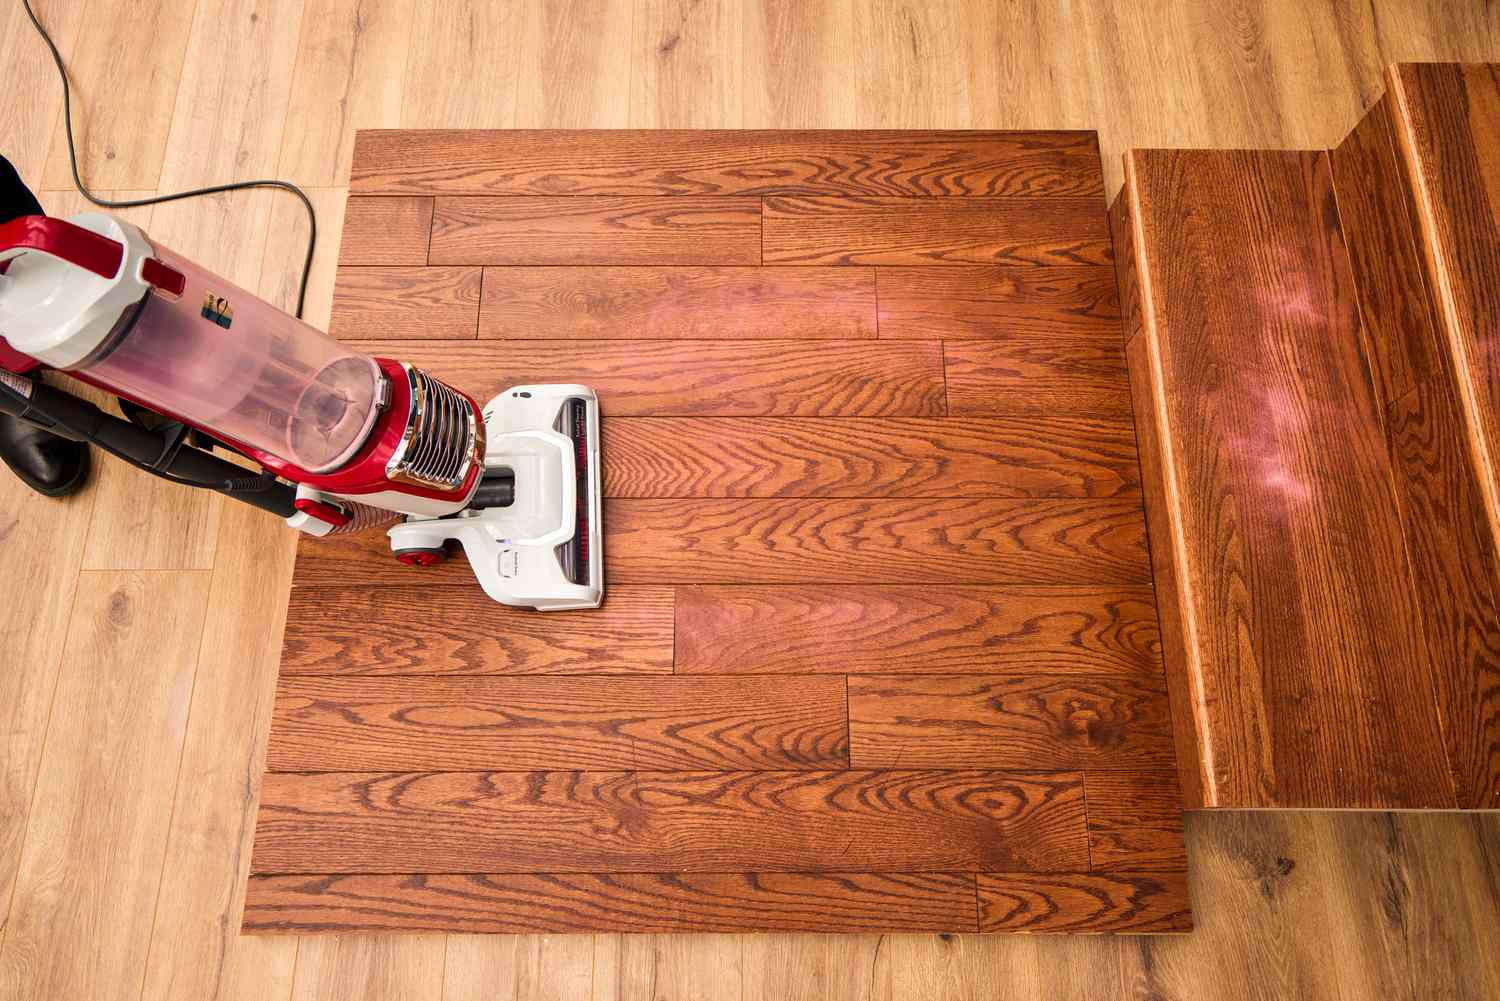 A person uses the Kenmore Allergen Seal Bagless Upright Vacuum to clean a wooden floor